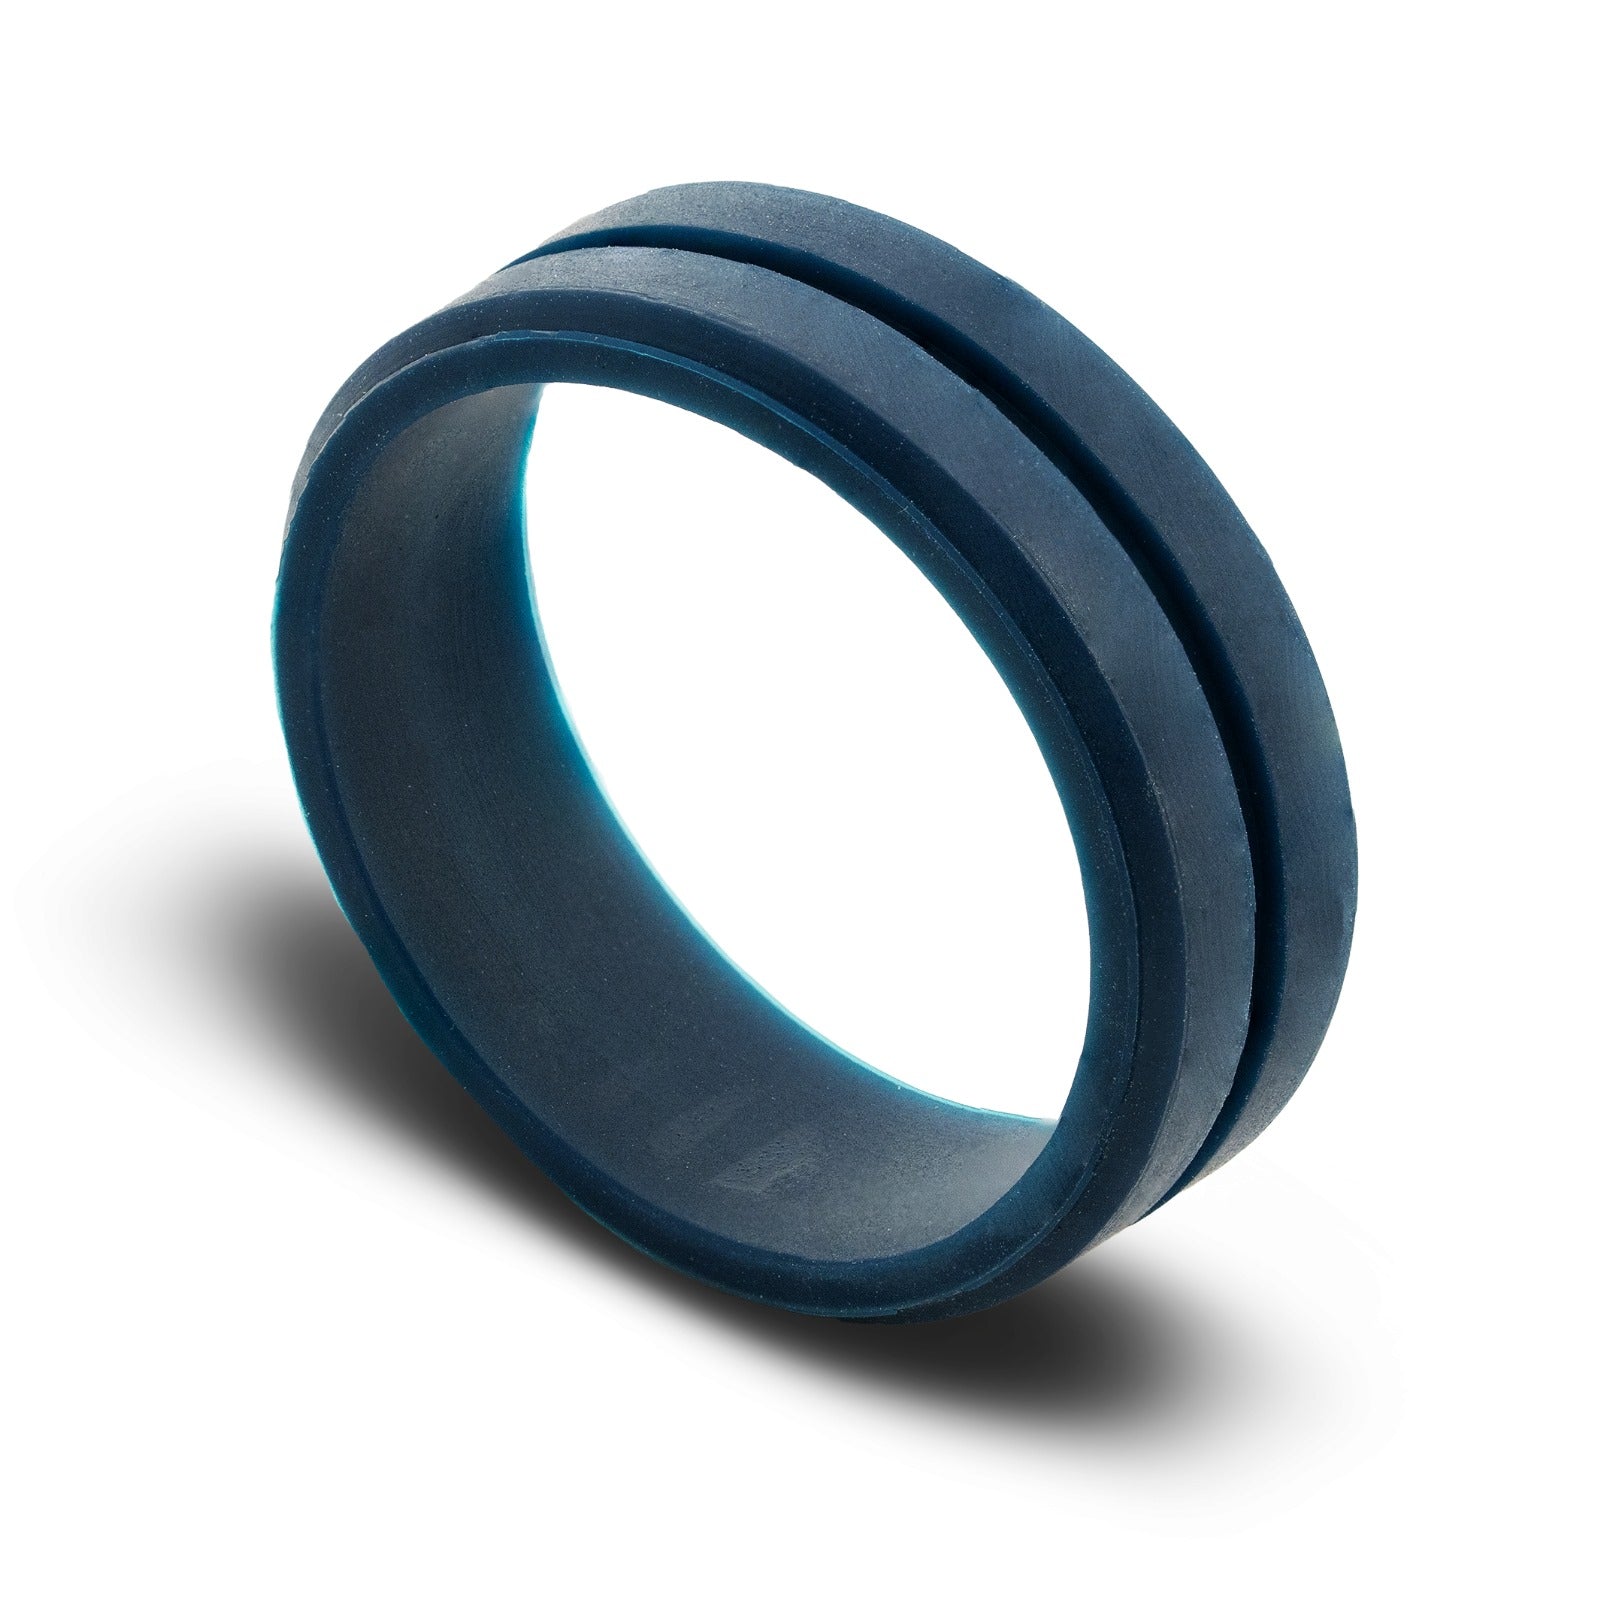 The “Deep Blue” Ring